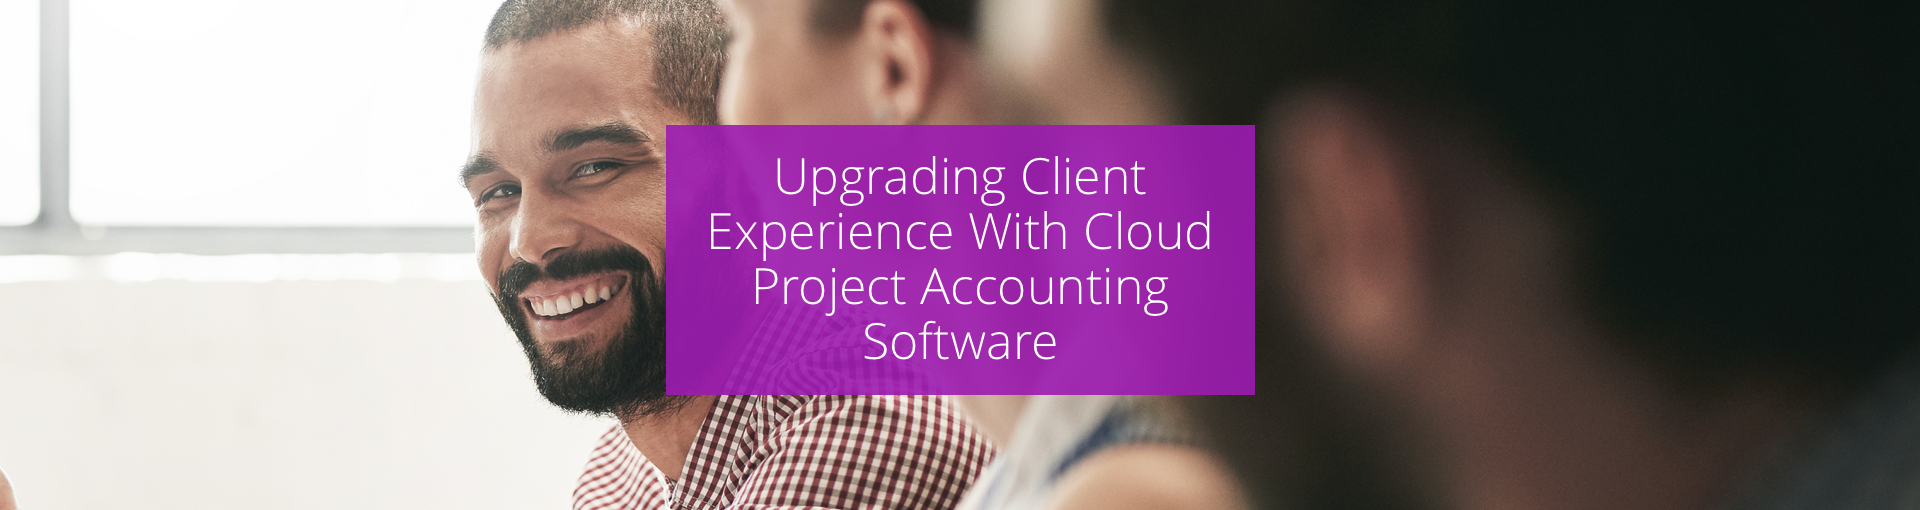 Upgrading Client Experience With Cloud Project Accounting Software